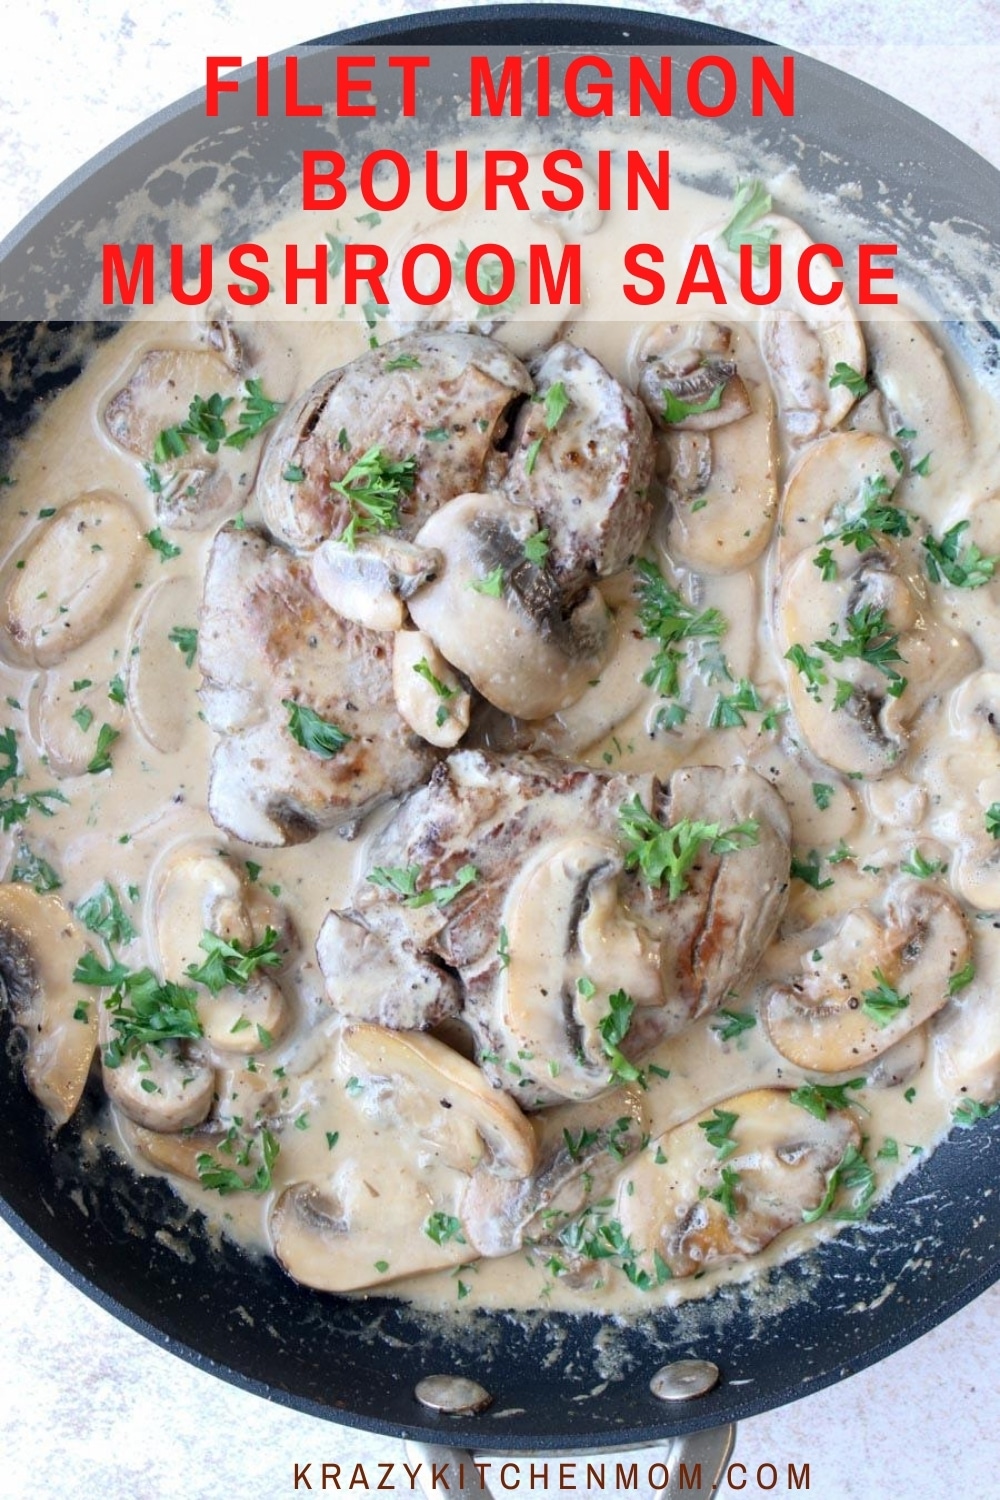 Tender filet mignon steaks smothered in a creamy, rich mushroom sauce with hints of sweet tanginess and garlic. This is a steak meal that you'd expect to find in a fancy restaurant but it's really super simple to make.  via @krazykitchenmom